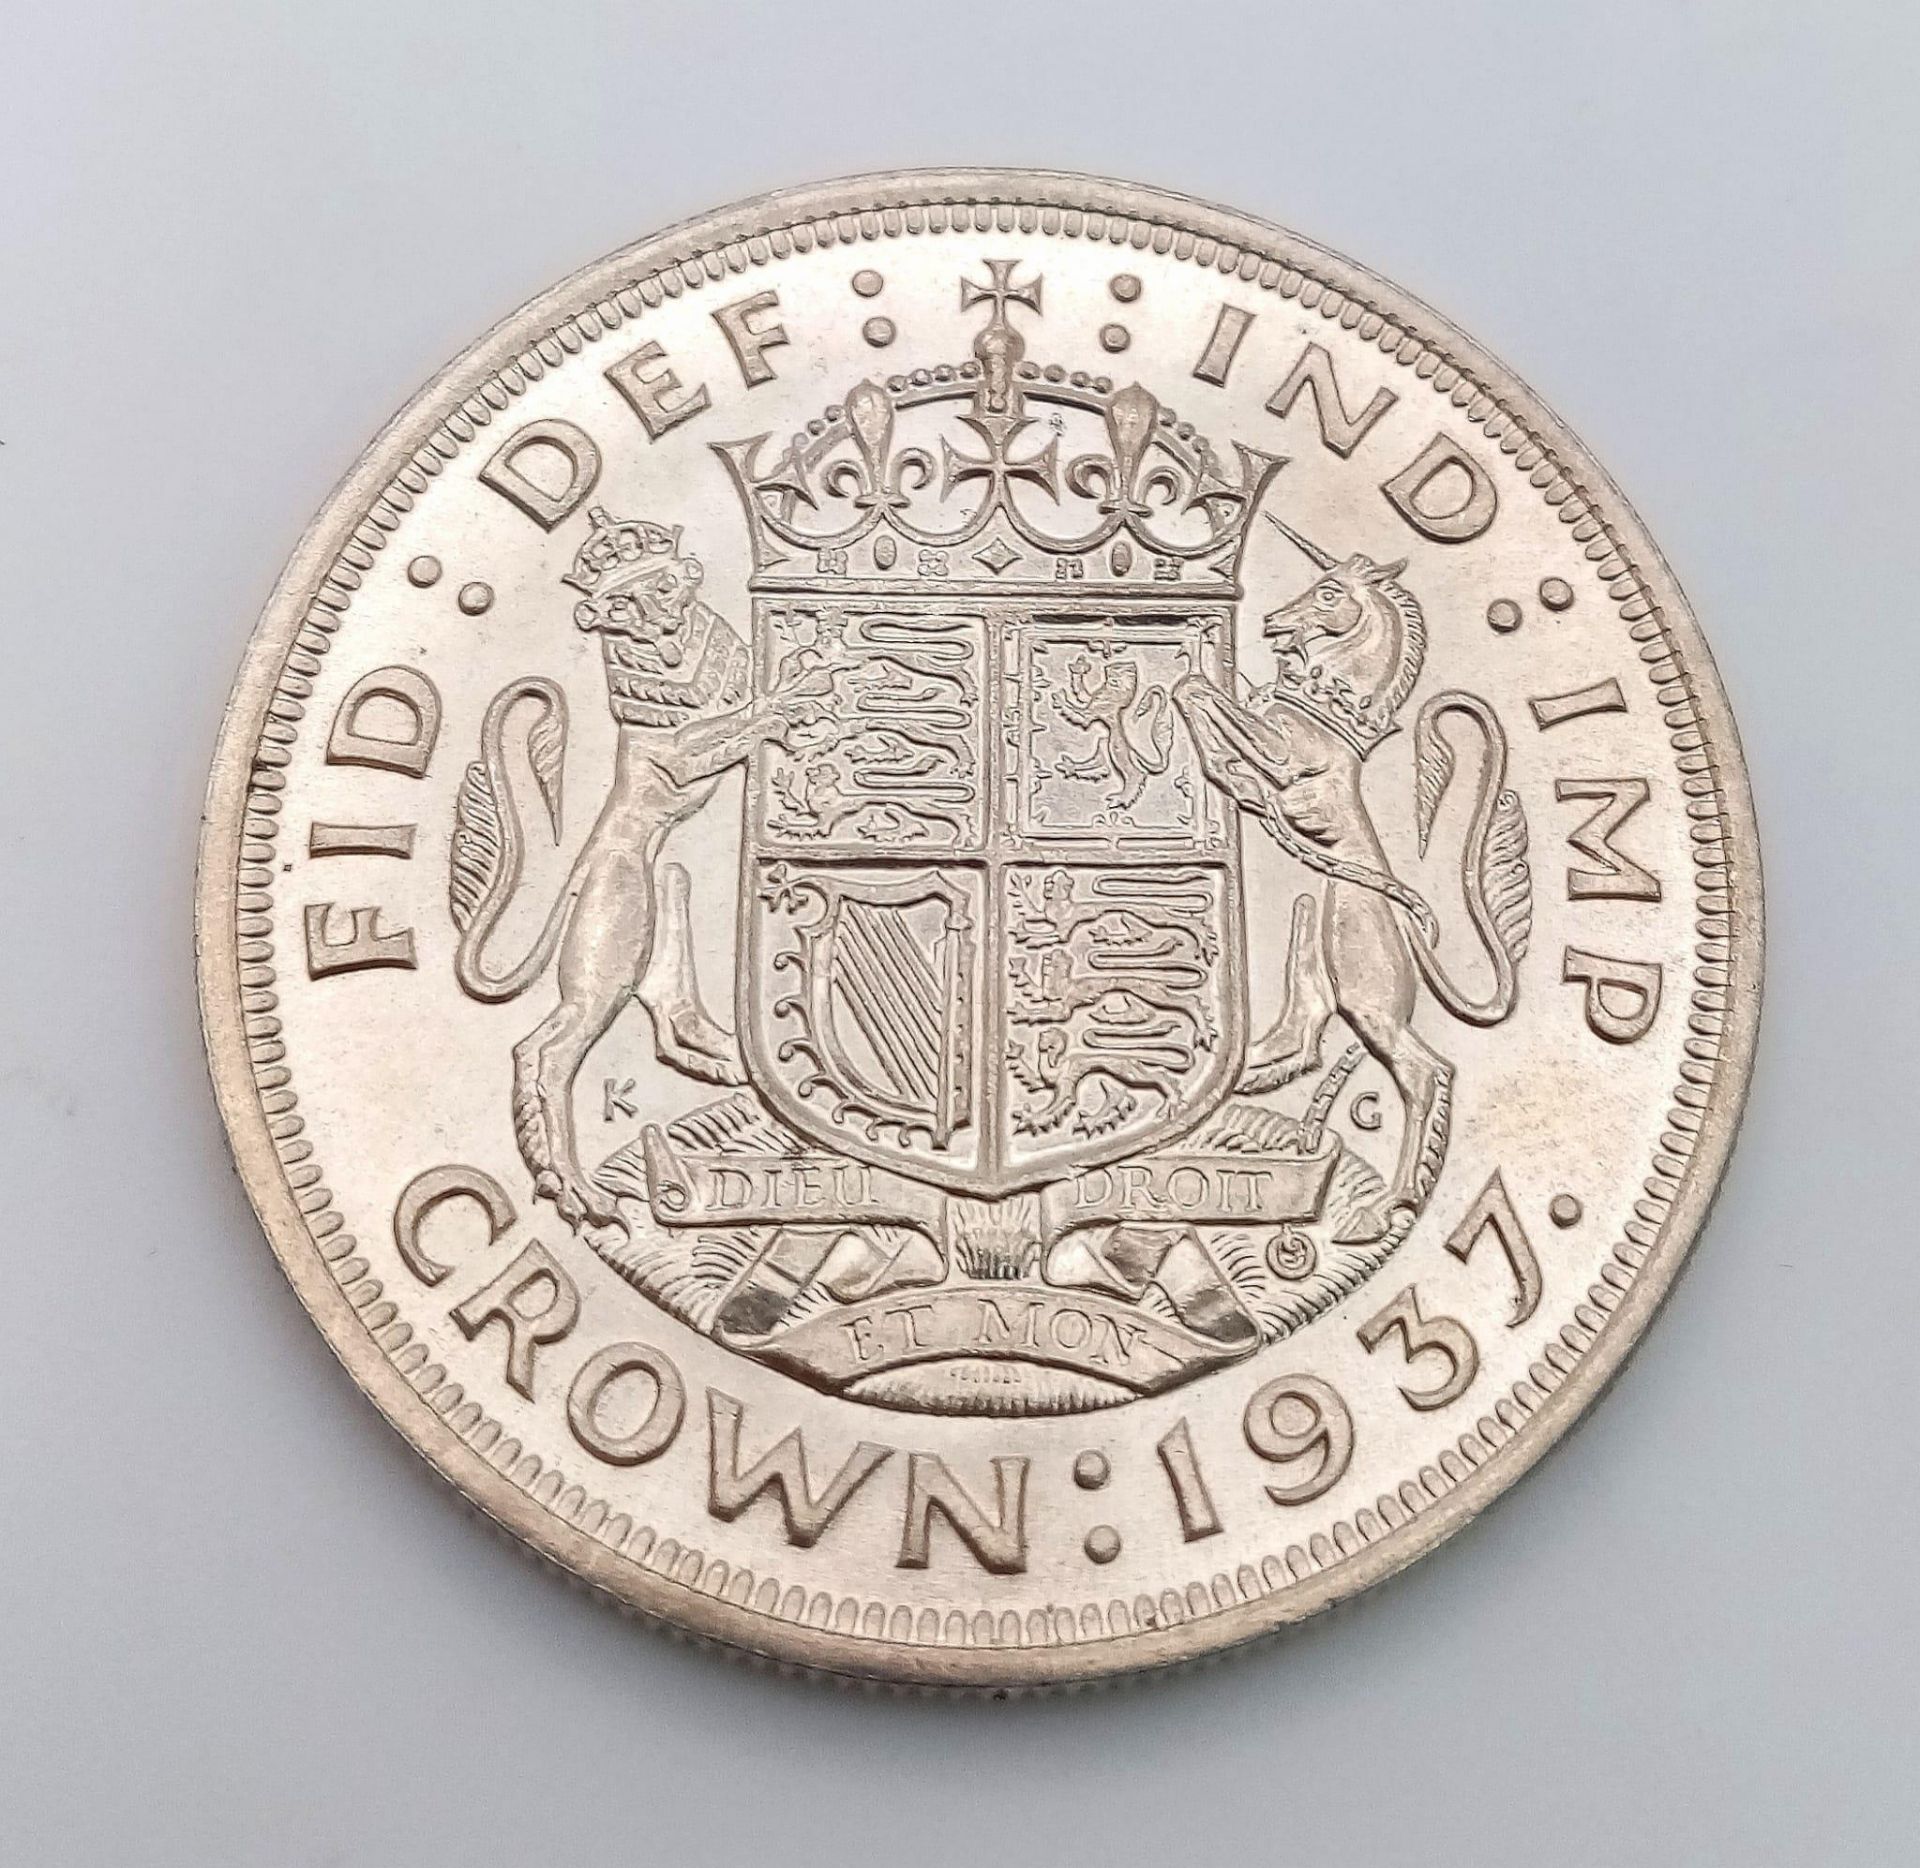 A 1937 George VI Silver Proof Crown Coin. EF+ grade but please see photos.